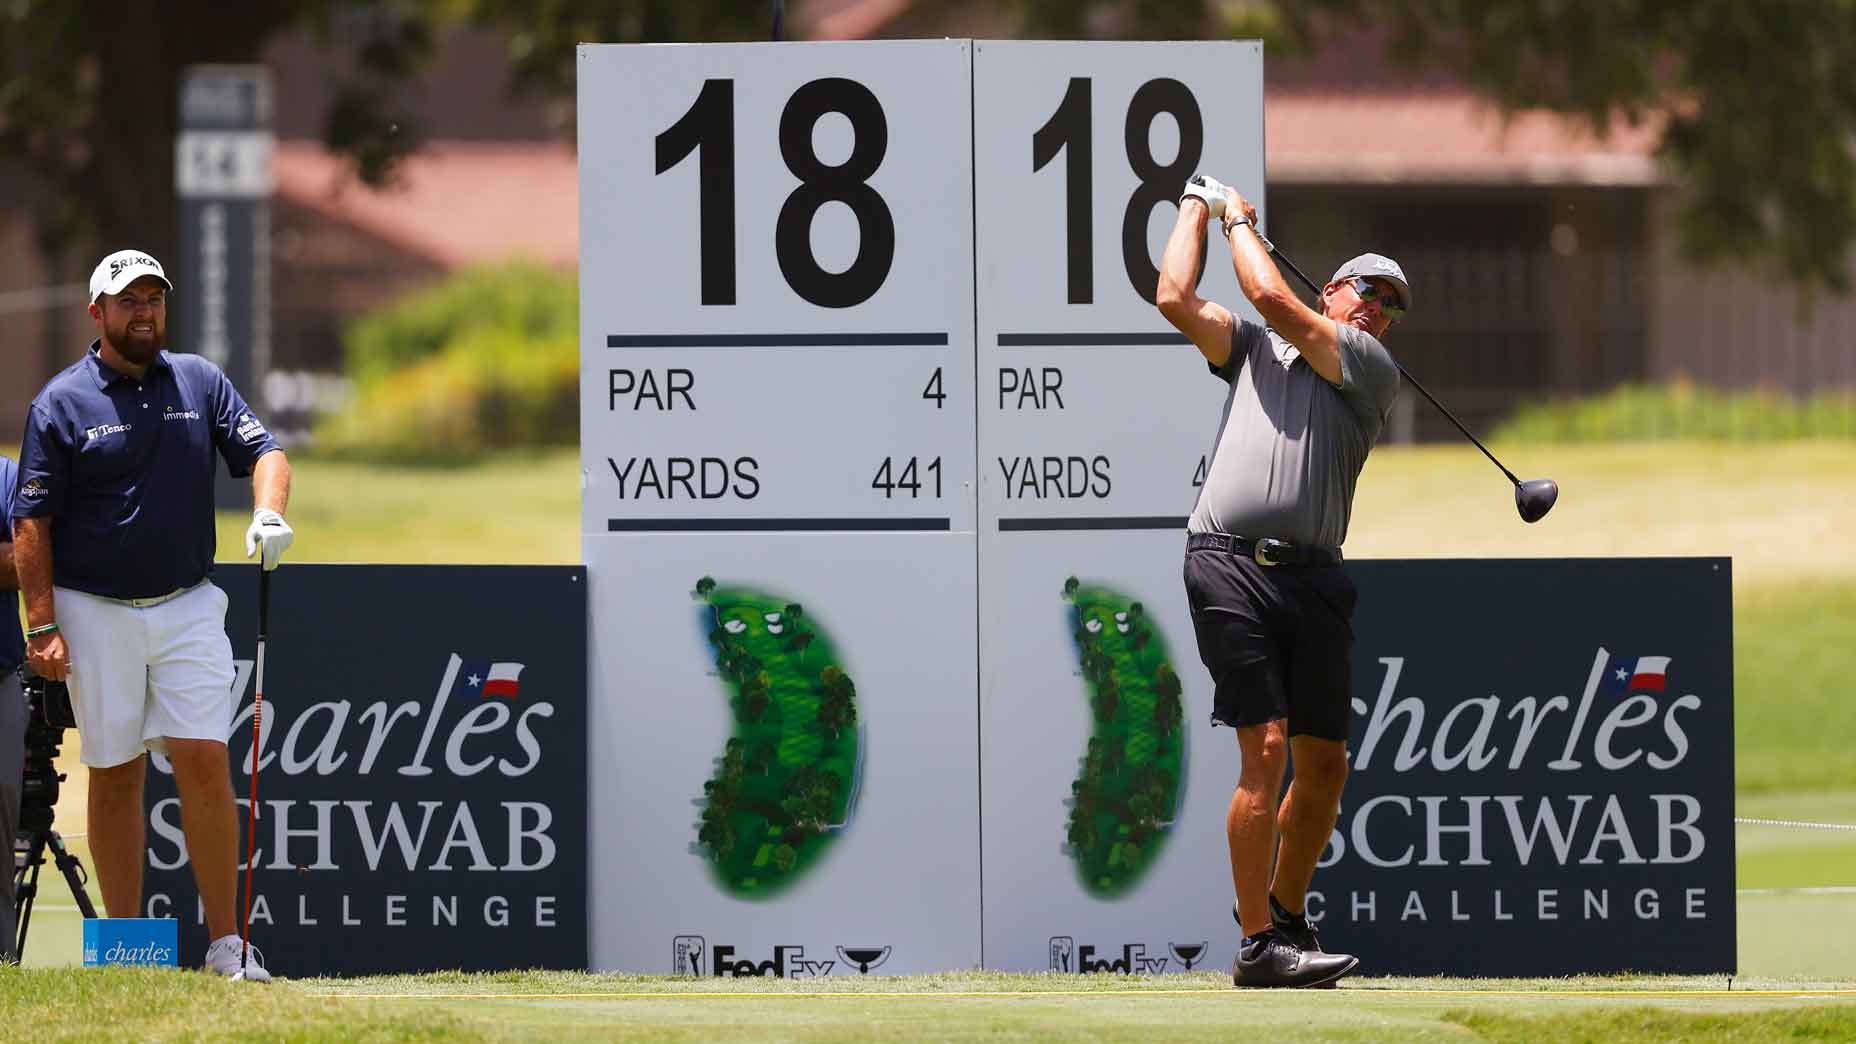 Charles Schwab Challenge live coverage How to watch Round 1 Thursday